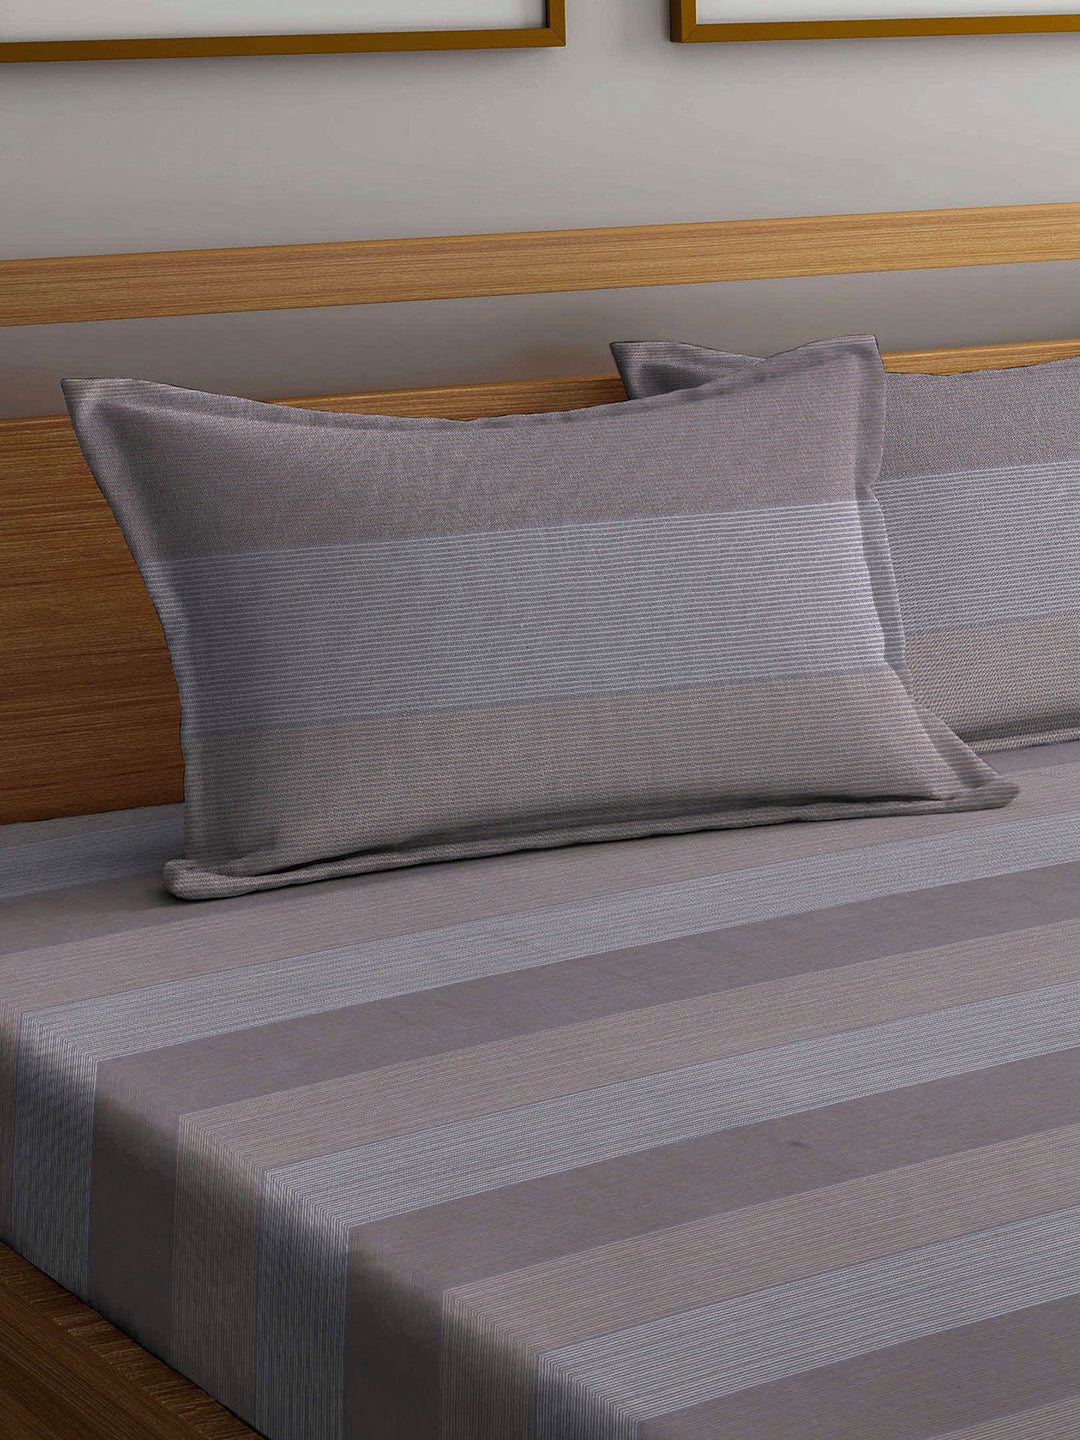 Arrabi Beige Stripes Handwoven Cotton King Size Bedsheet with 2 Pillow Covers (260 X 250 cm)